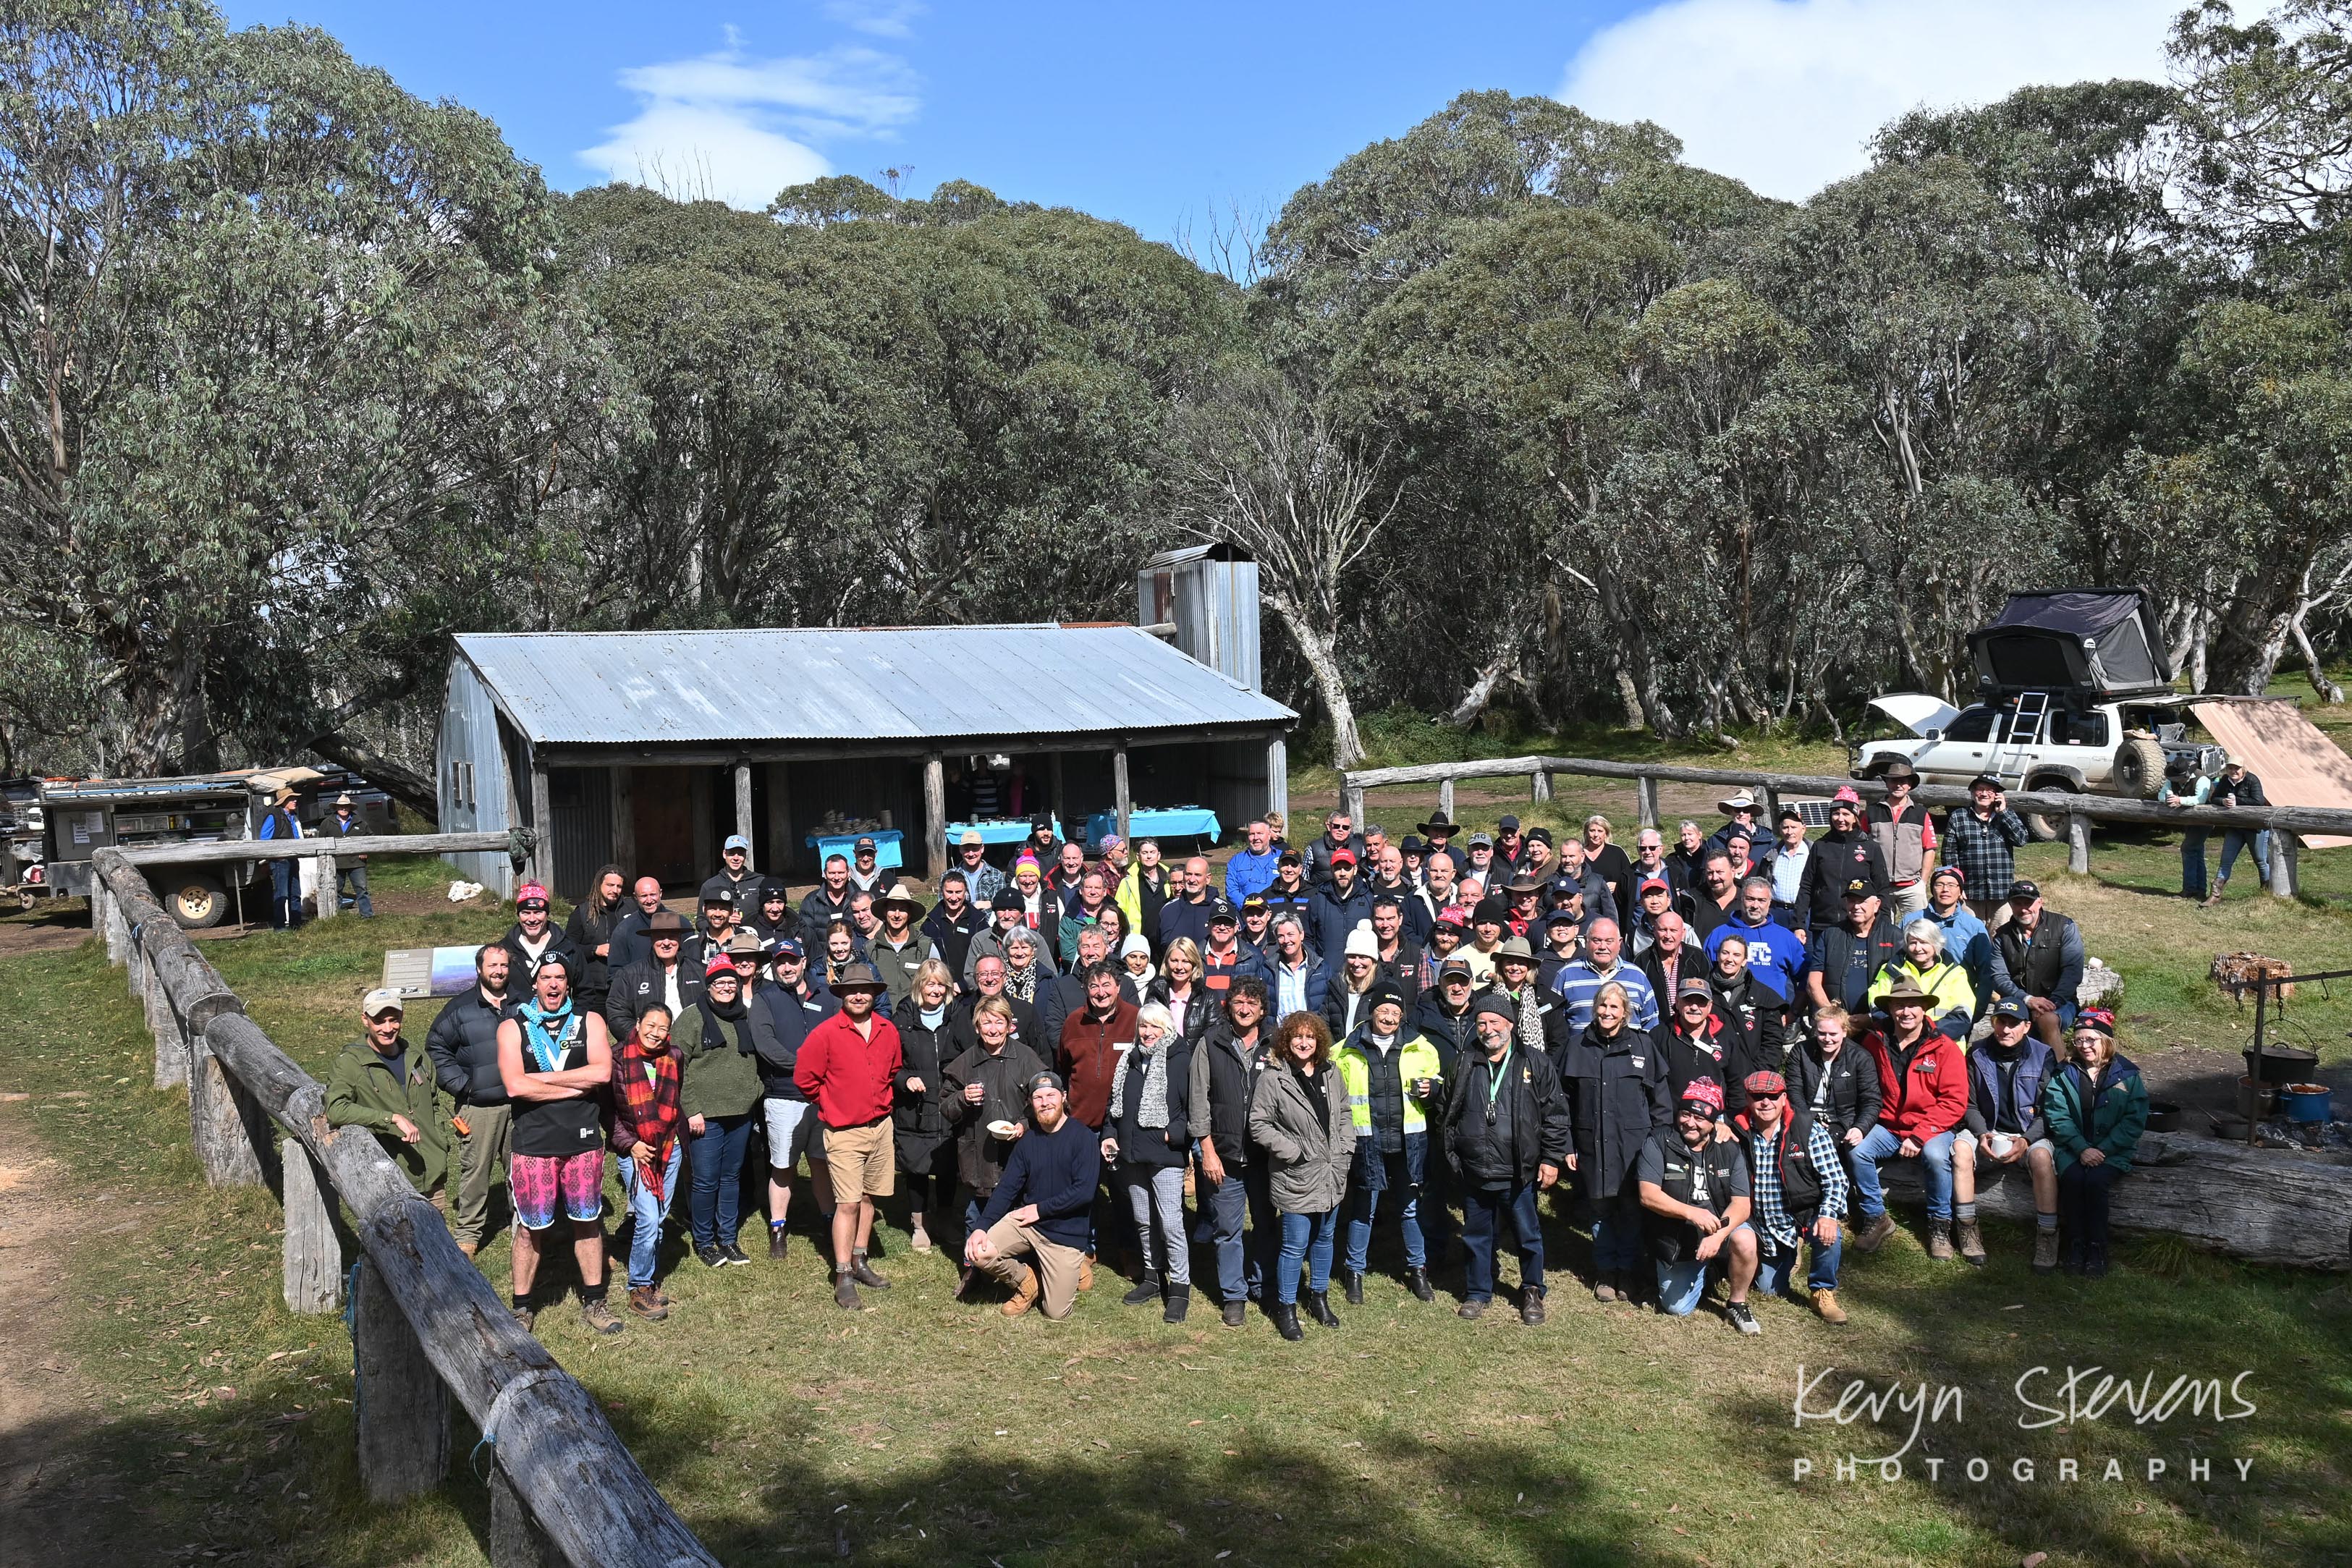 The 2022 Variety 4WD Adventure has raised an outstanding $744,000 (net) for SA kids in need